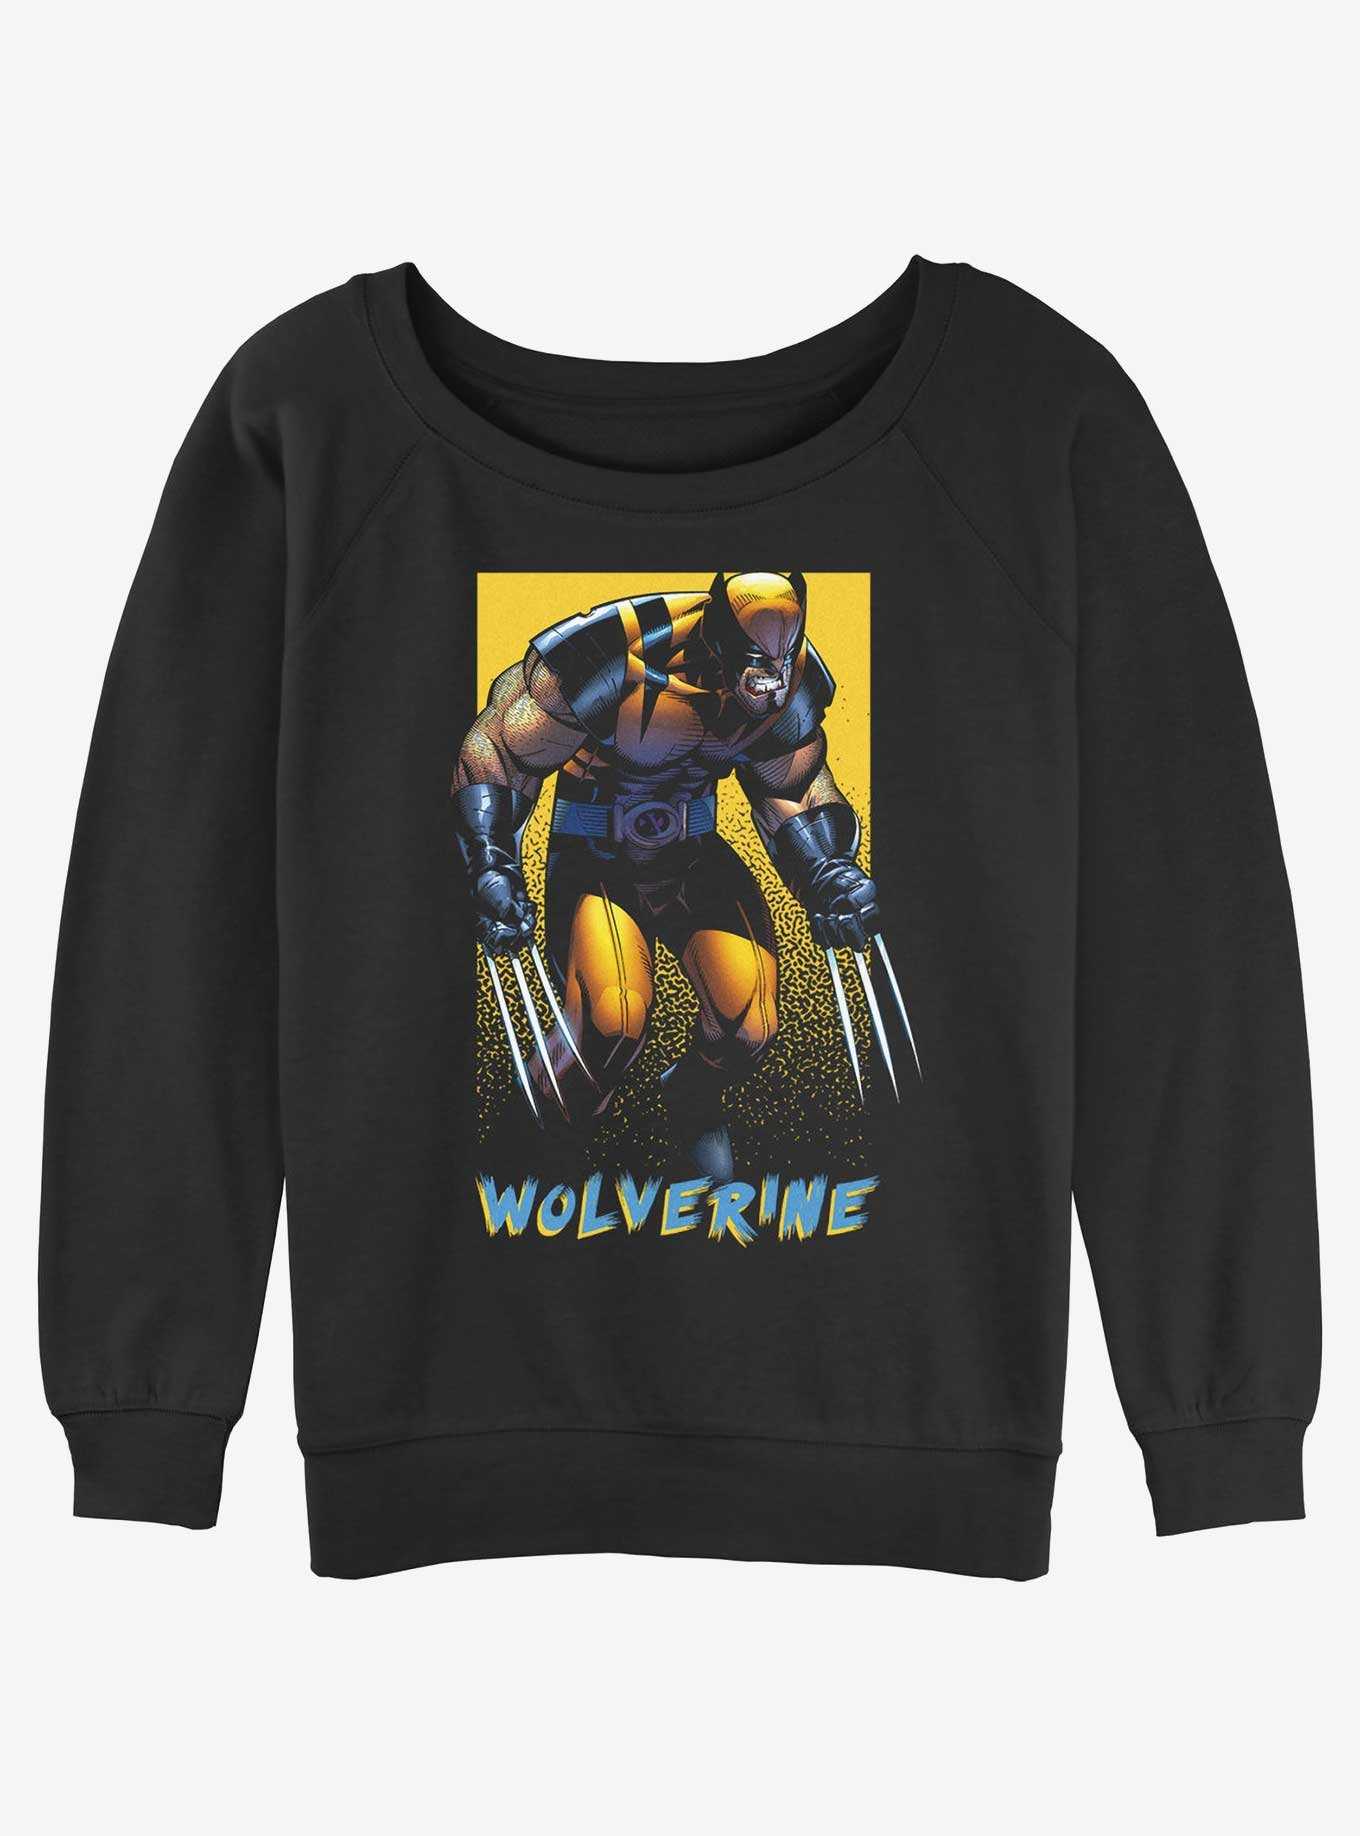 Wolverine Claws Out Poster Girls Slouchy Sweatshirt, , hi-res